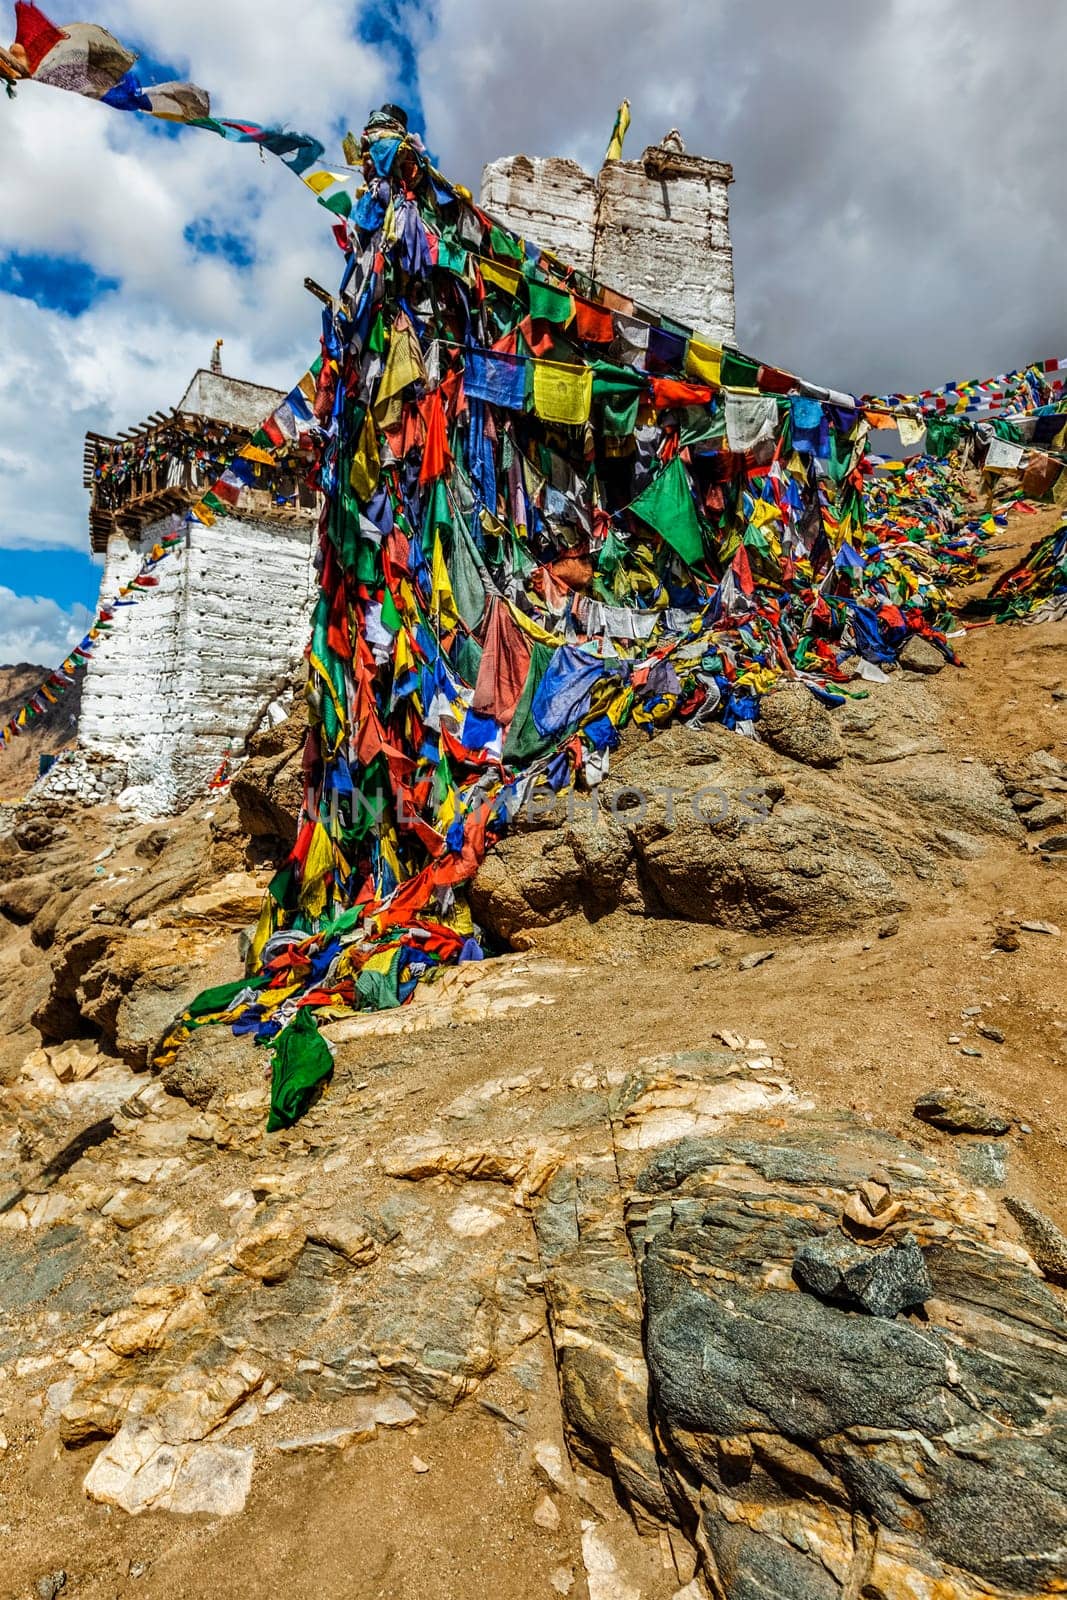 Ruins of Victory Fort Tsemo on the cliff of Namgyal hill and colorful Buddhist prayer flags with Buddhism mantra written on them. Leh, Ladakh, Jammu and Kashmir, India